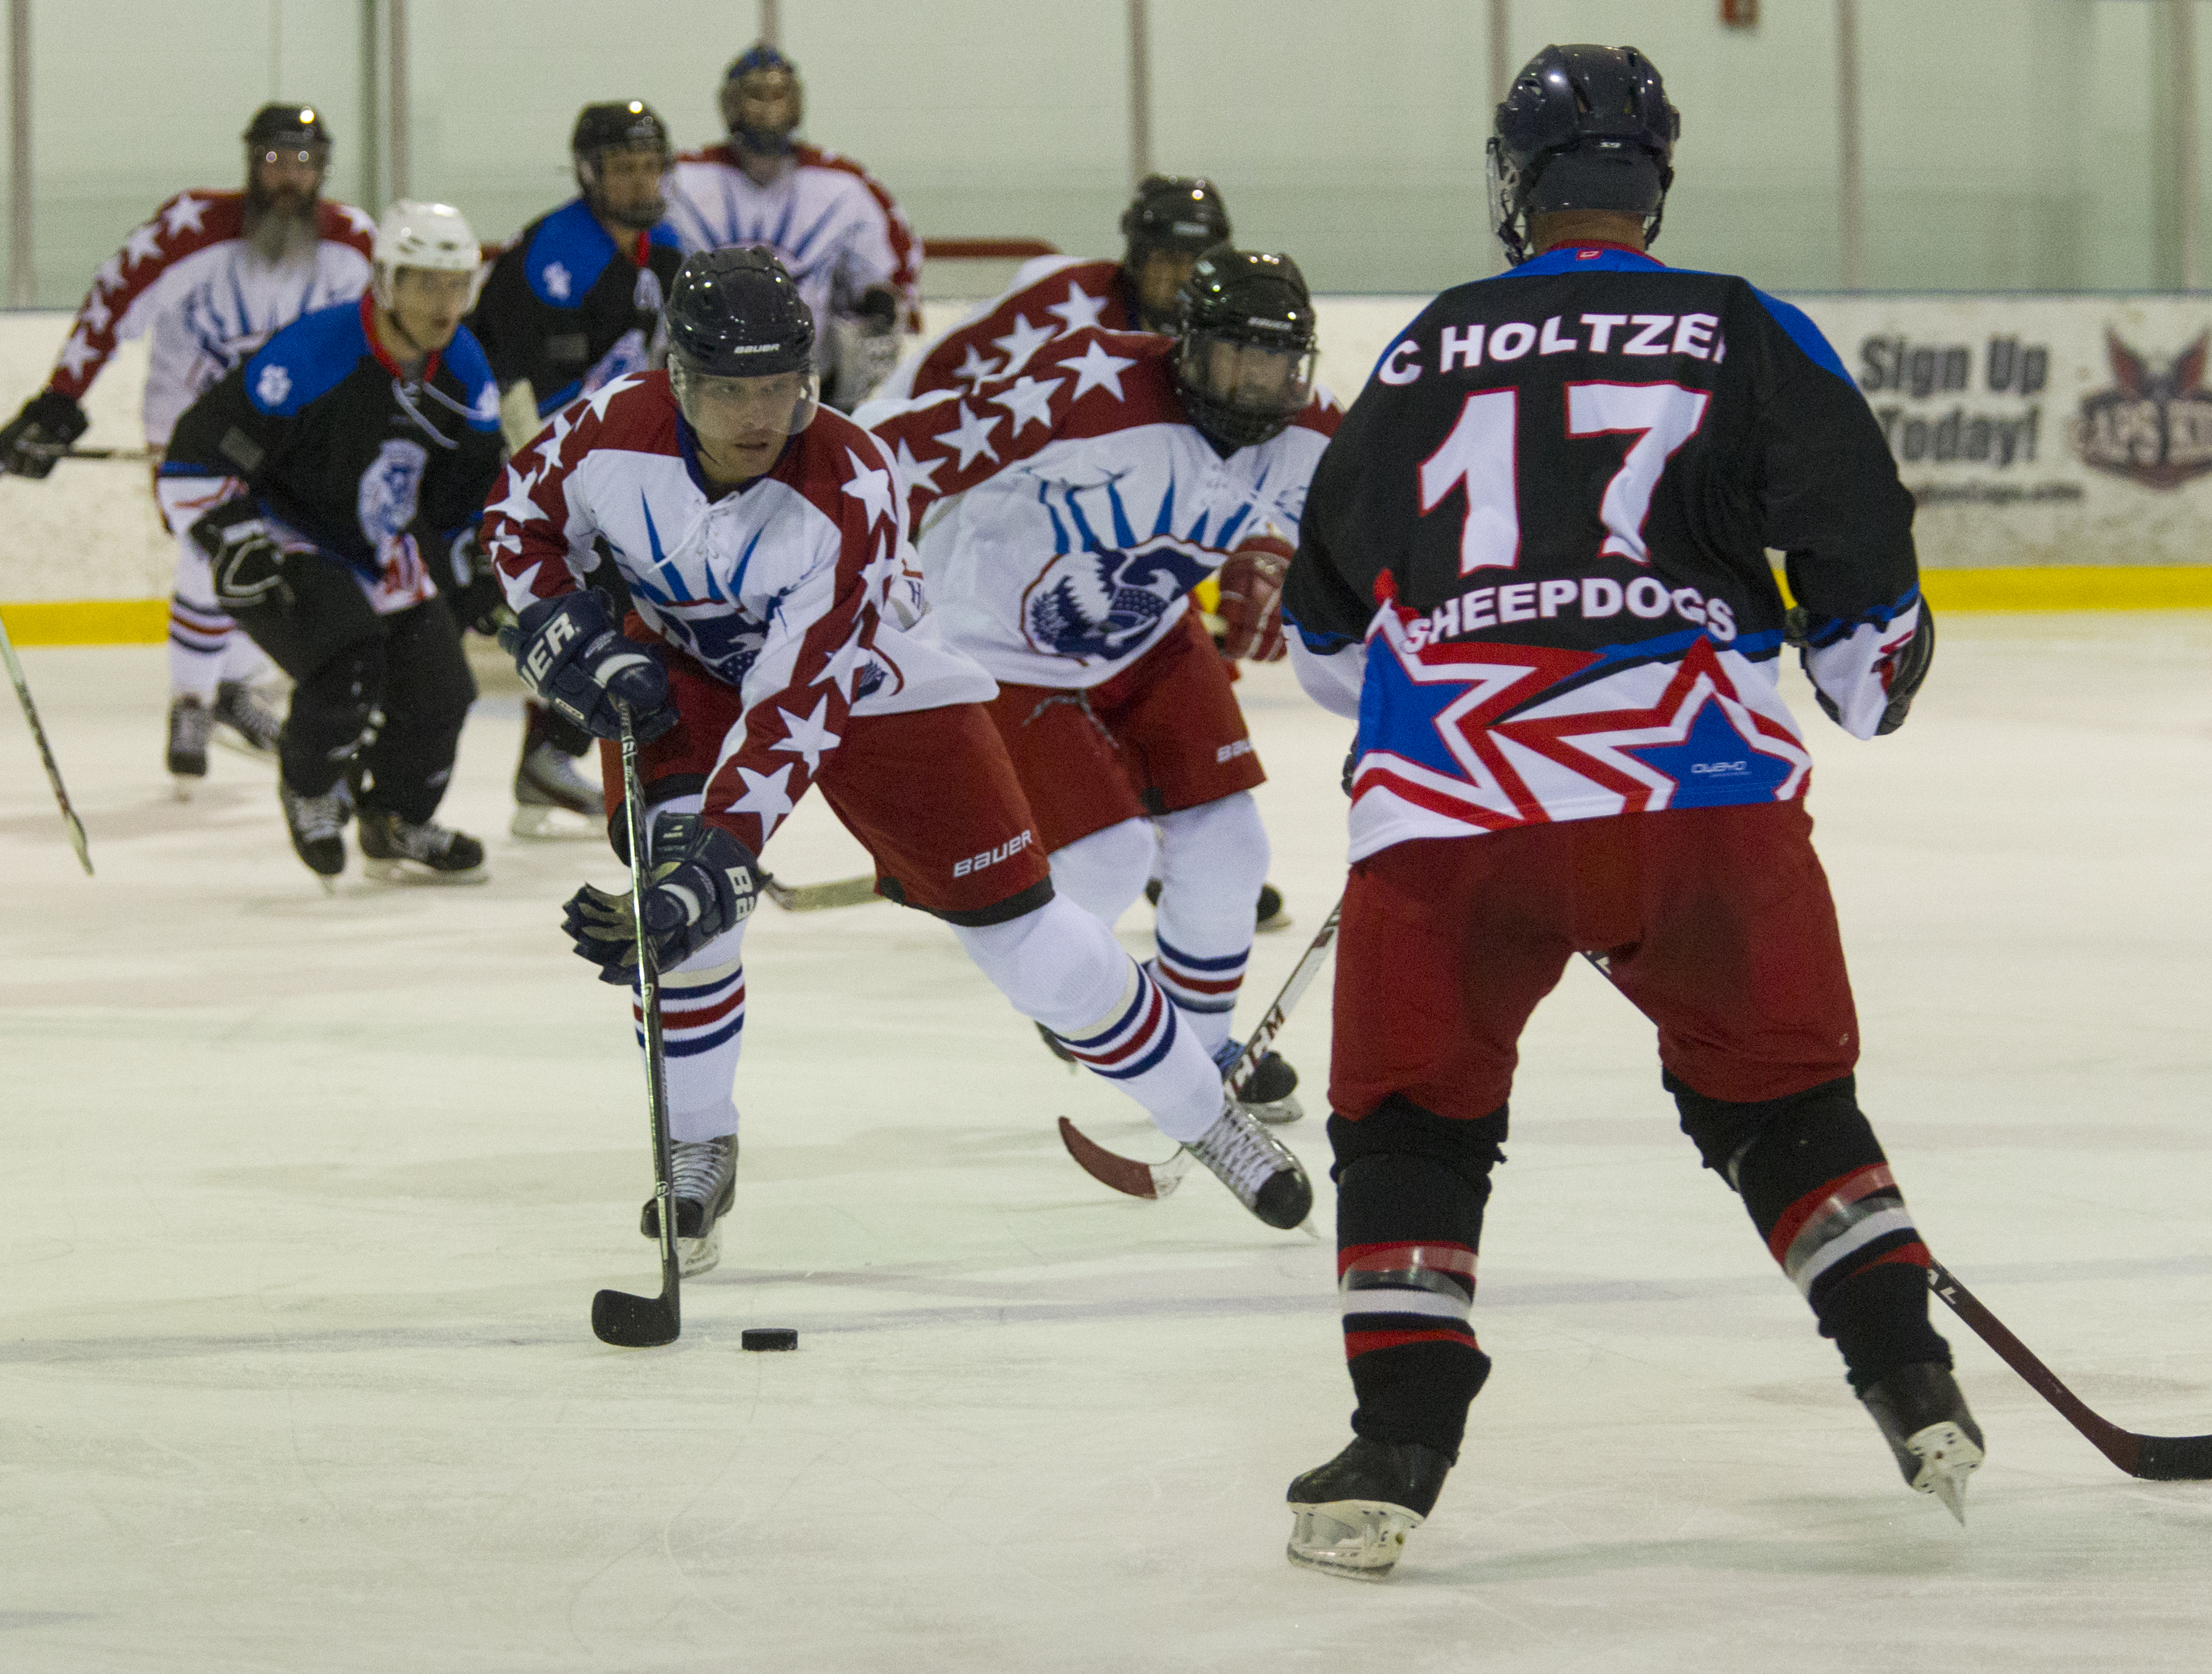 The CBP-ICE ice hockey team, in dark jerseys, defeated the Department of Homeland Security's team 4-2 in the first round at the 2015 World Police & Fire Games. Ice hockey matches were played throughout the tournament’s seven days. Photo by James Tourtellotte